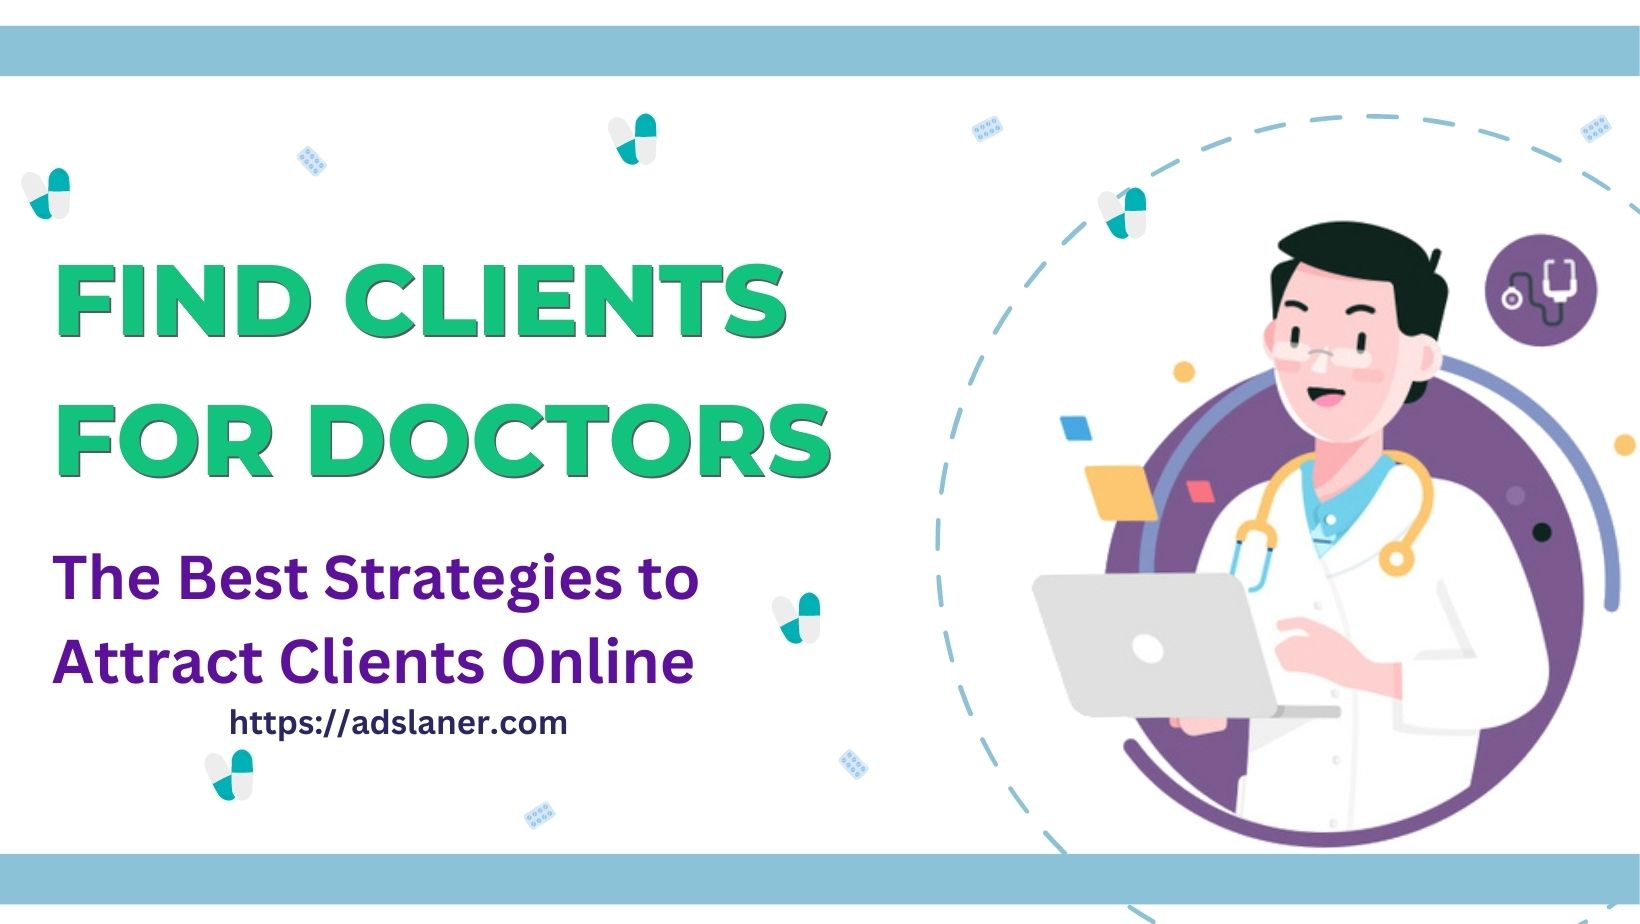 Find clients for doctors - The Best Strategies to Attract Clients Online